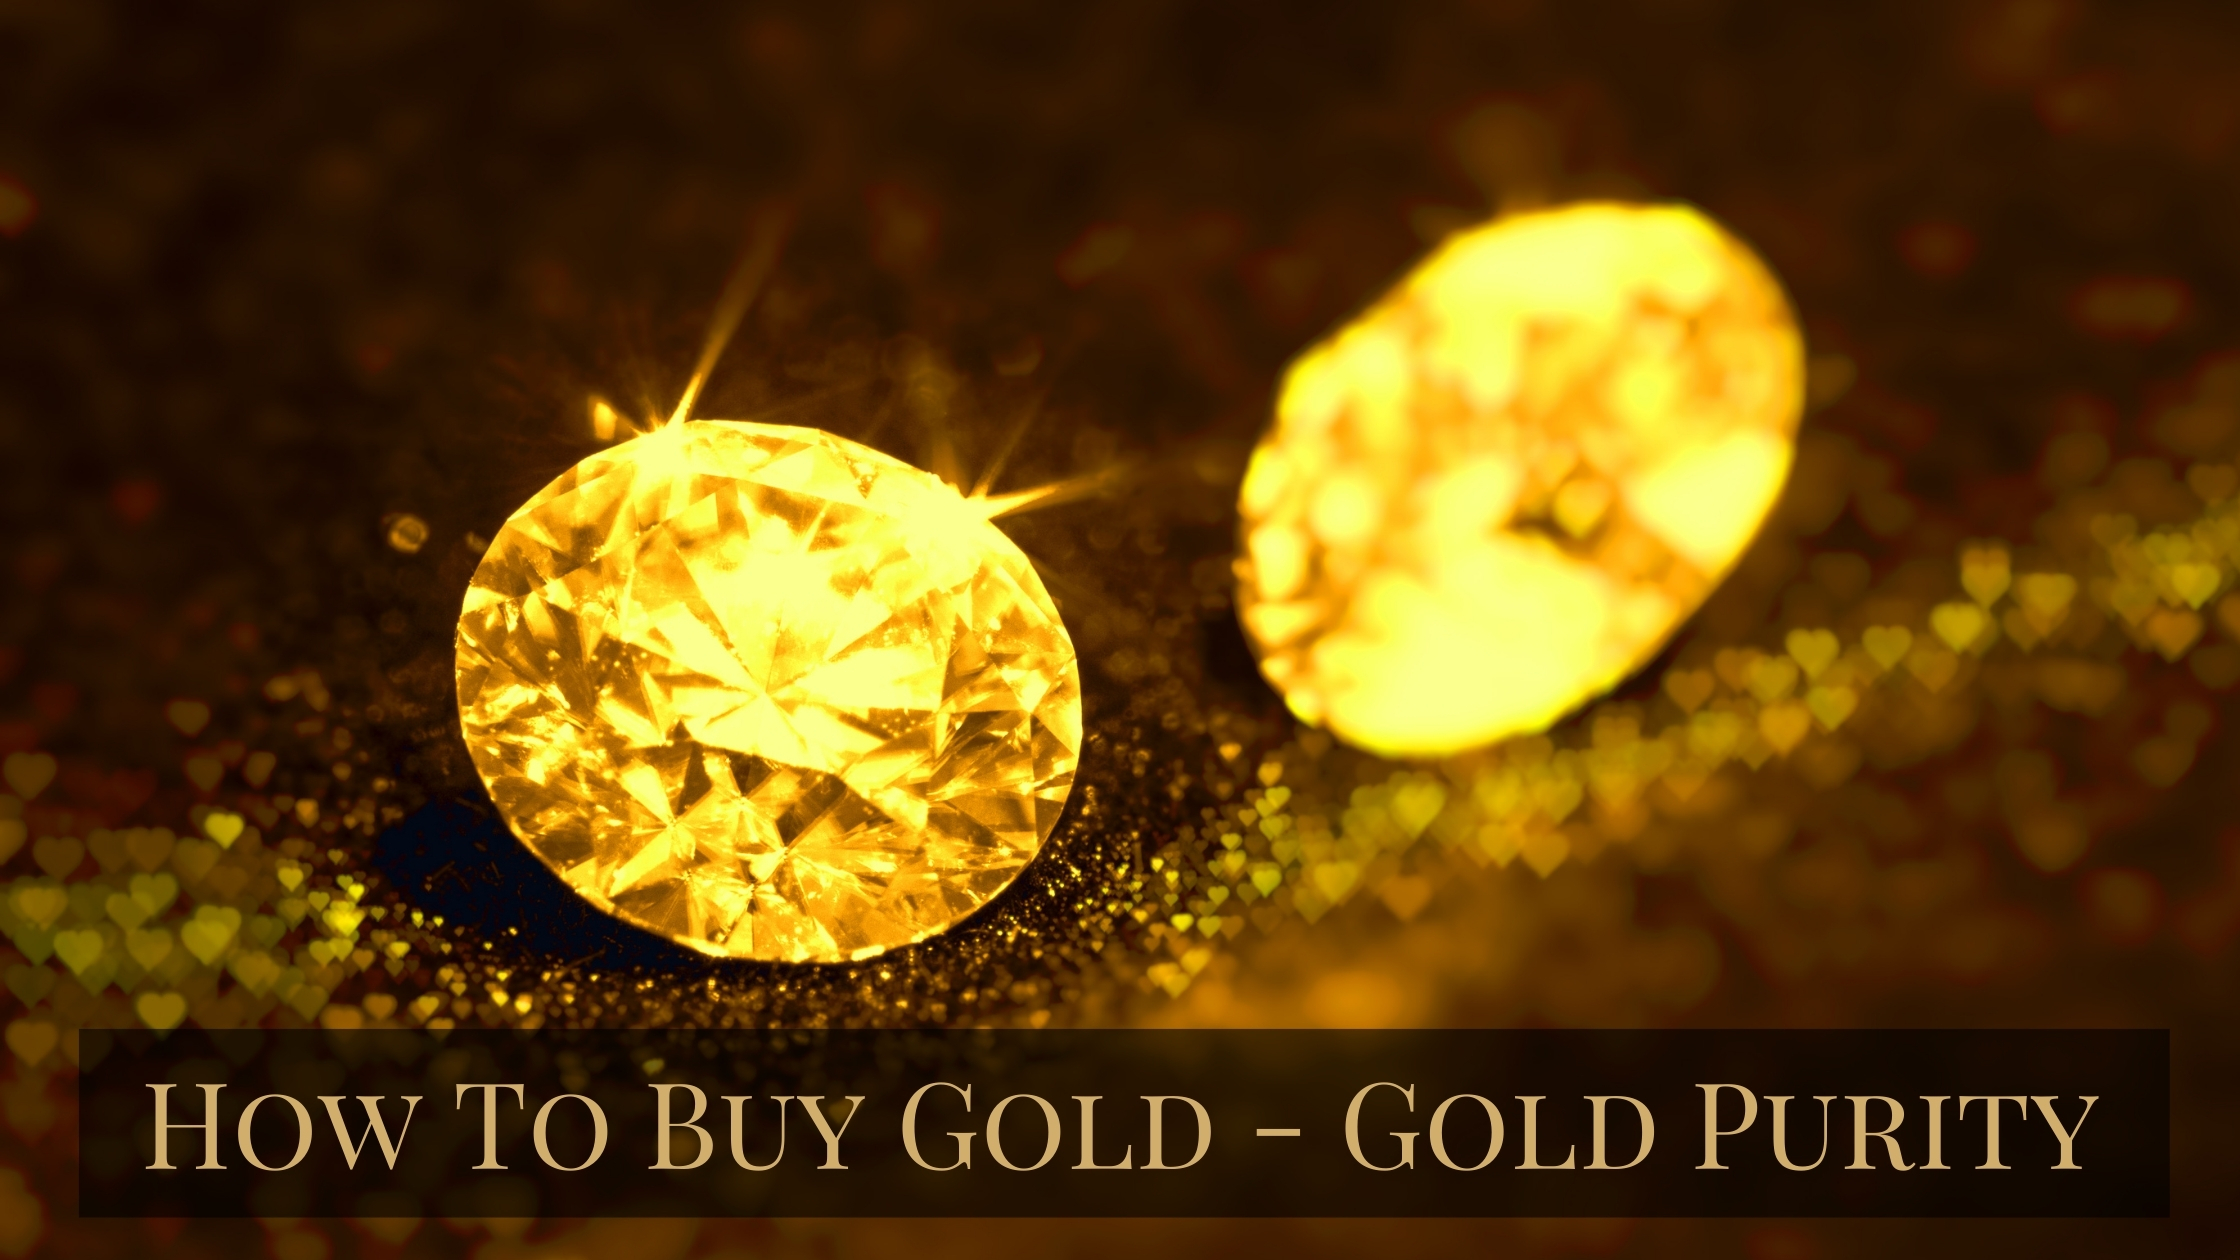 How to buy gold - gold purity diamonds reflecting gold